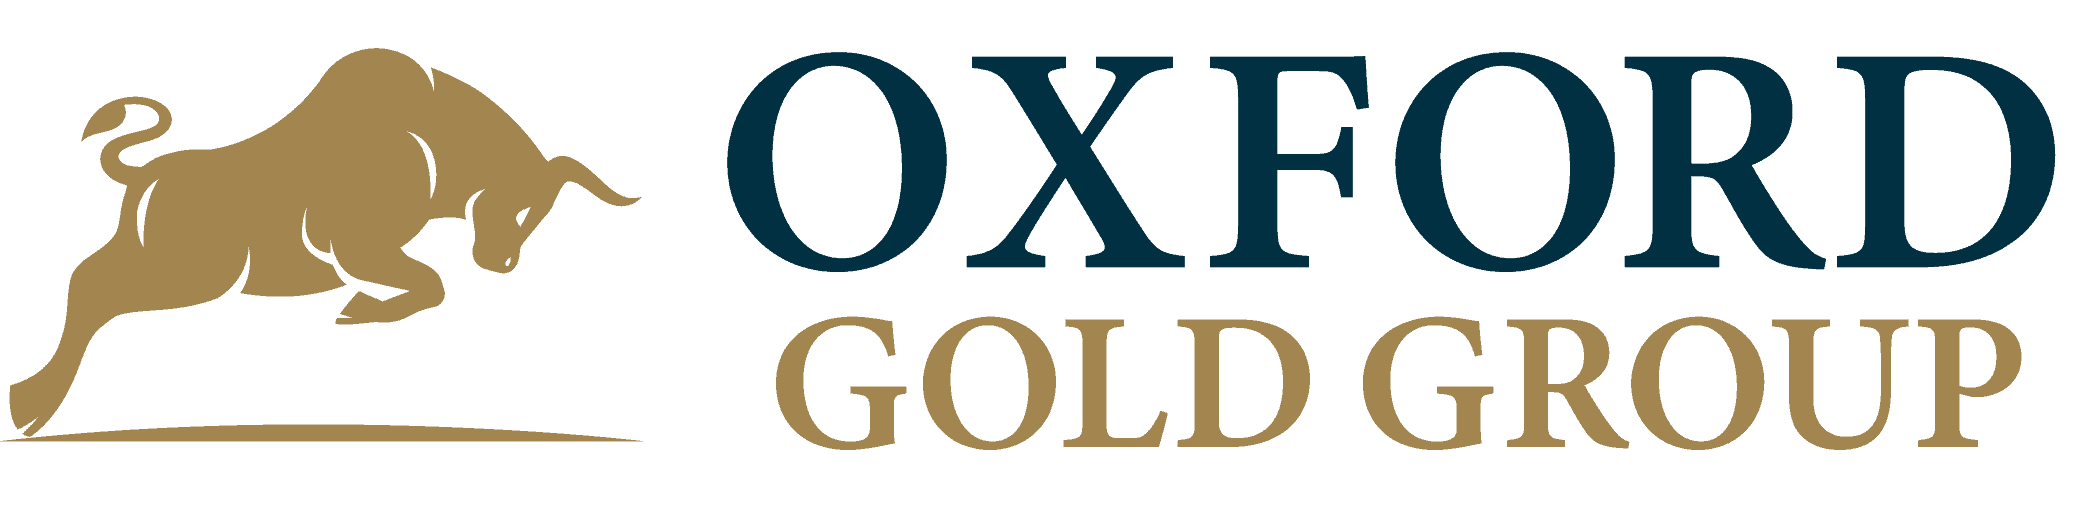 Oxford Gold Group Review